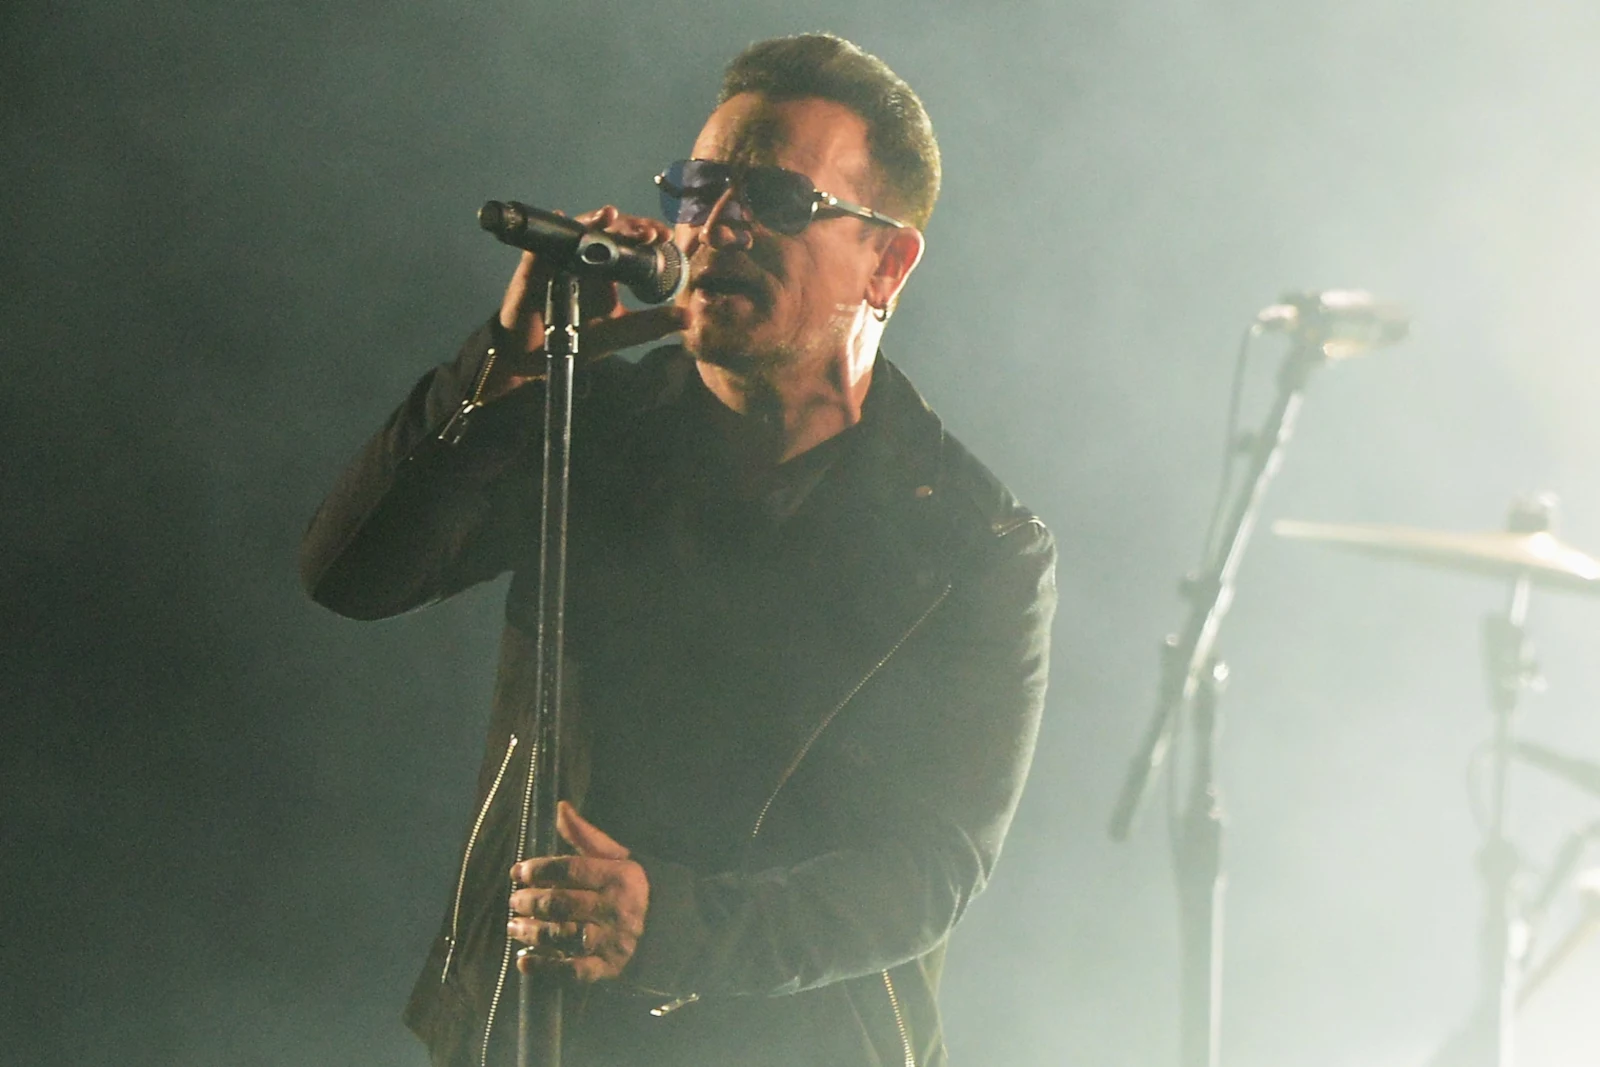 U2 Launch New Era of Live Music at Sphere Opening Concert in Las Vegas